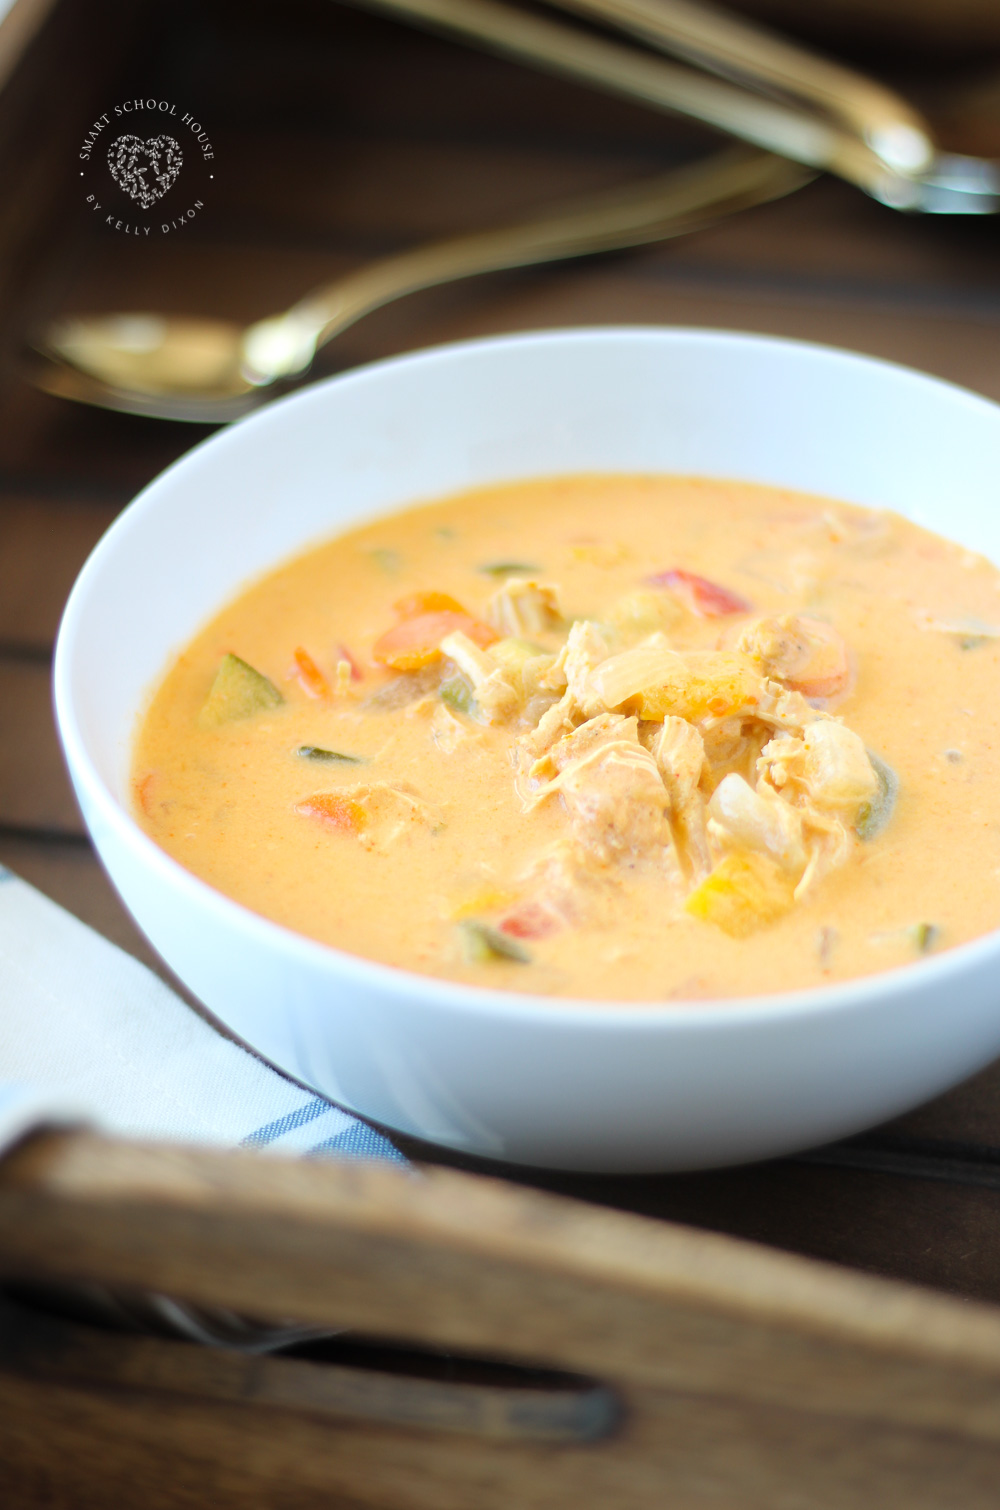 This creamy crock pot curry soup is a healthy dinner recipe that's perfect for fall and winter. Crock pot curry is one of the easiest meals to make and is so tasty. Your family will LOVE it! #chicken #chickencurry #slowcooker #crockpotrecipes #chickenrecipes #thaicurry